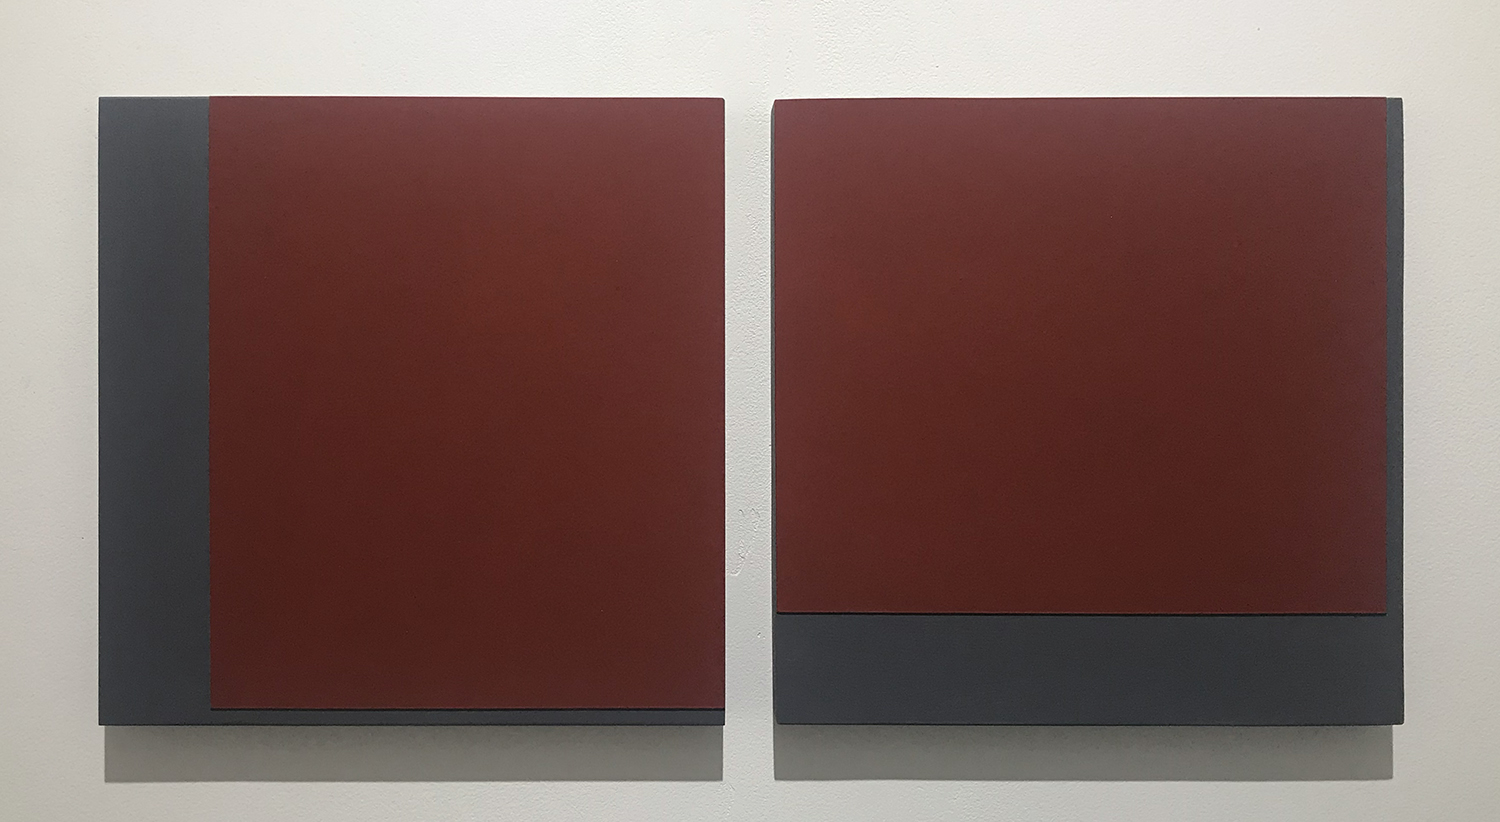 TS2221<br>Gesso on panel, 22.5 x 22.5 cm (each), 2022